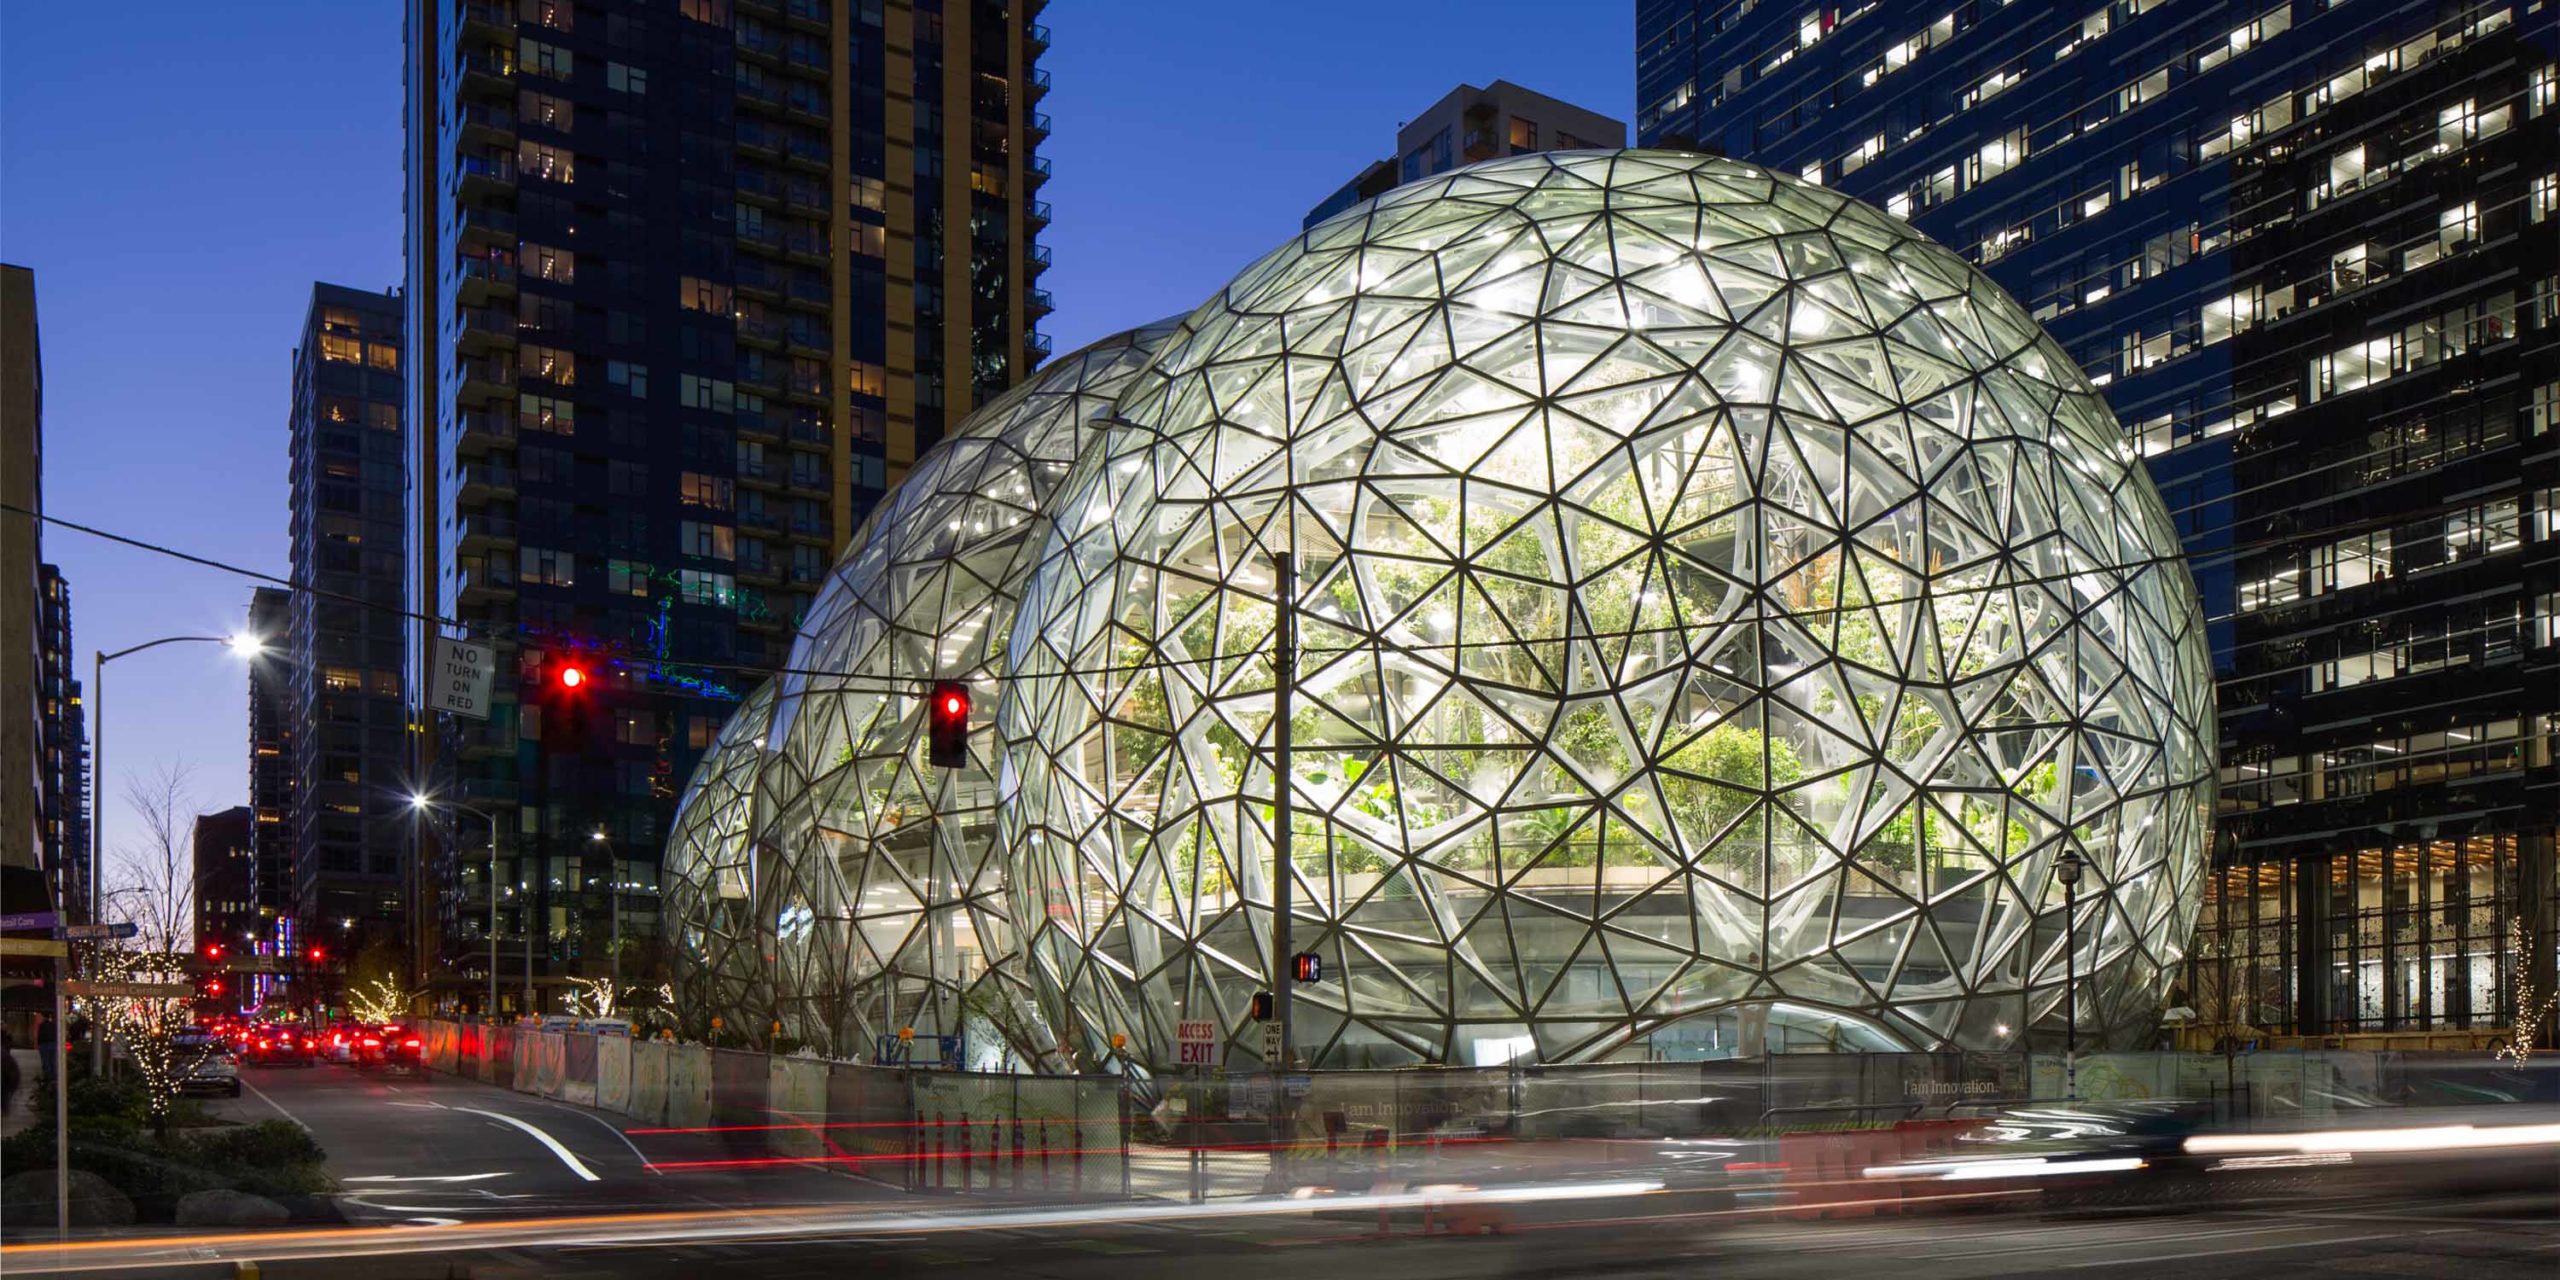 The Spheres at Amazon header image #7